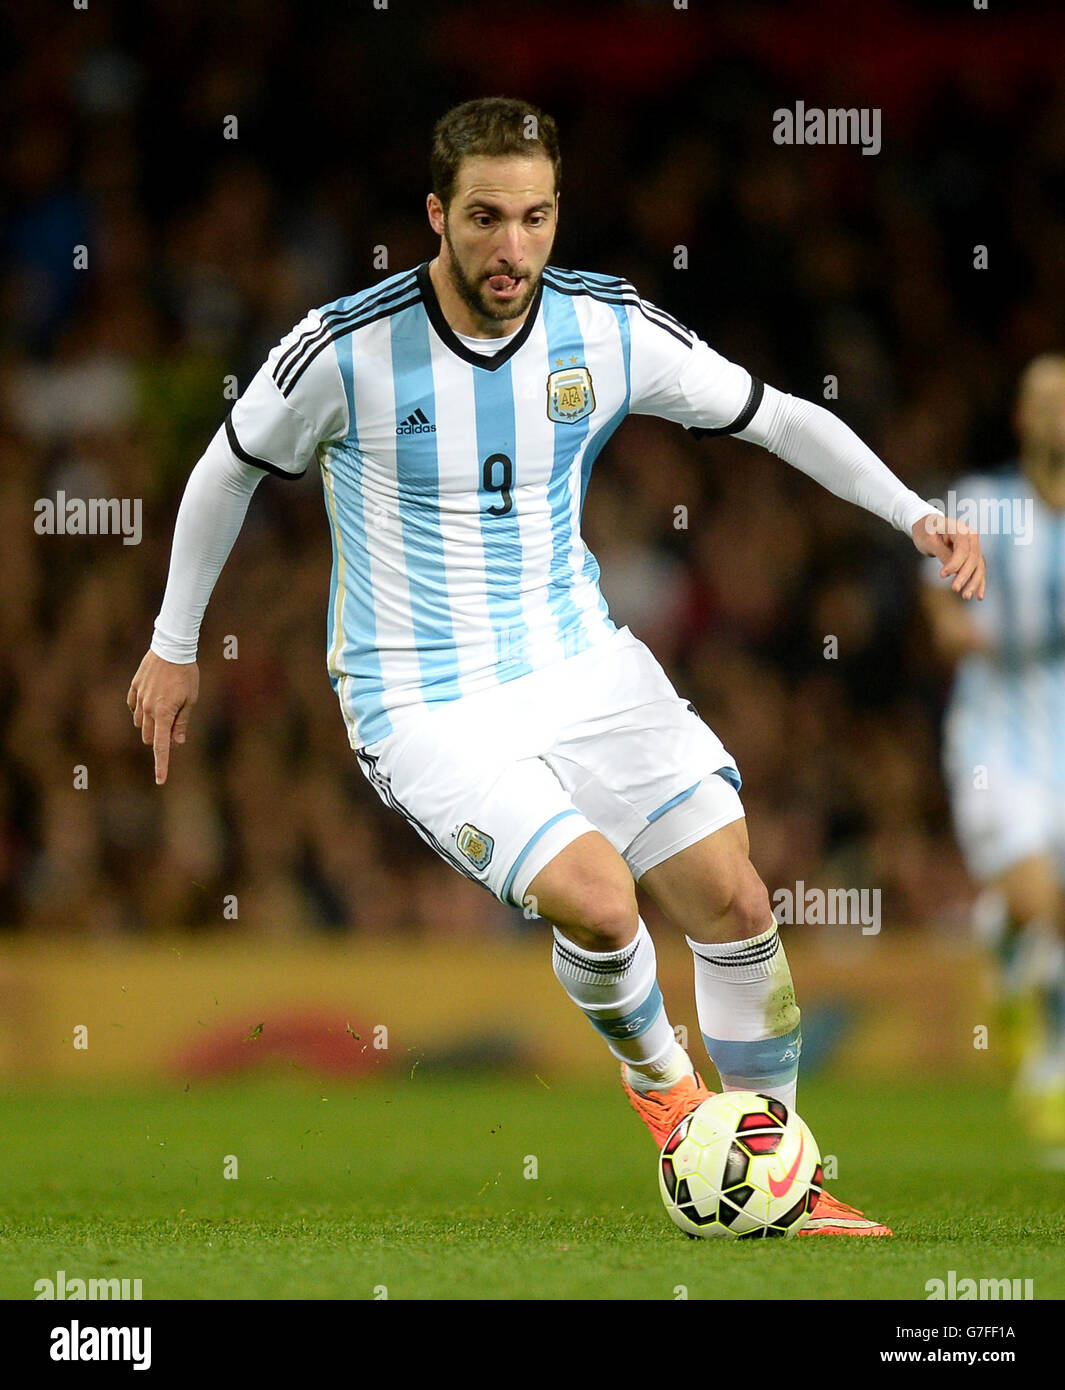 Argentina's Gonzalo Higuain during the International Friendly match at Old Trafford, Manchester. PRESS ASSOCIATION Photo. Picture date: Tuesday November 18, 2014. See PA Story SOCCER Argentina. Photo credit should read: Martin Rickett/PA Wire. Stock Photo